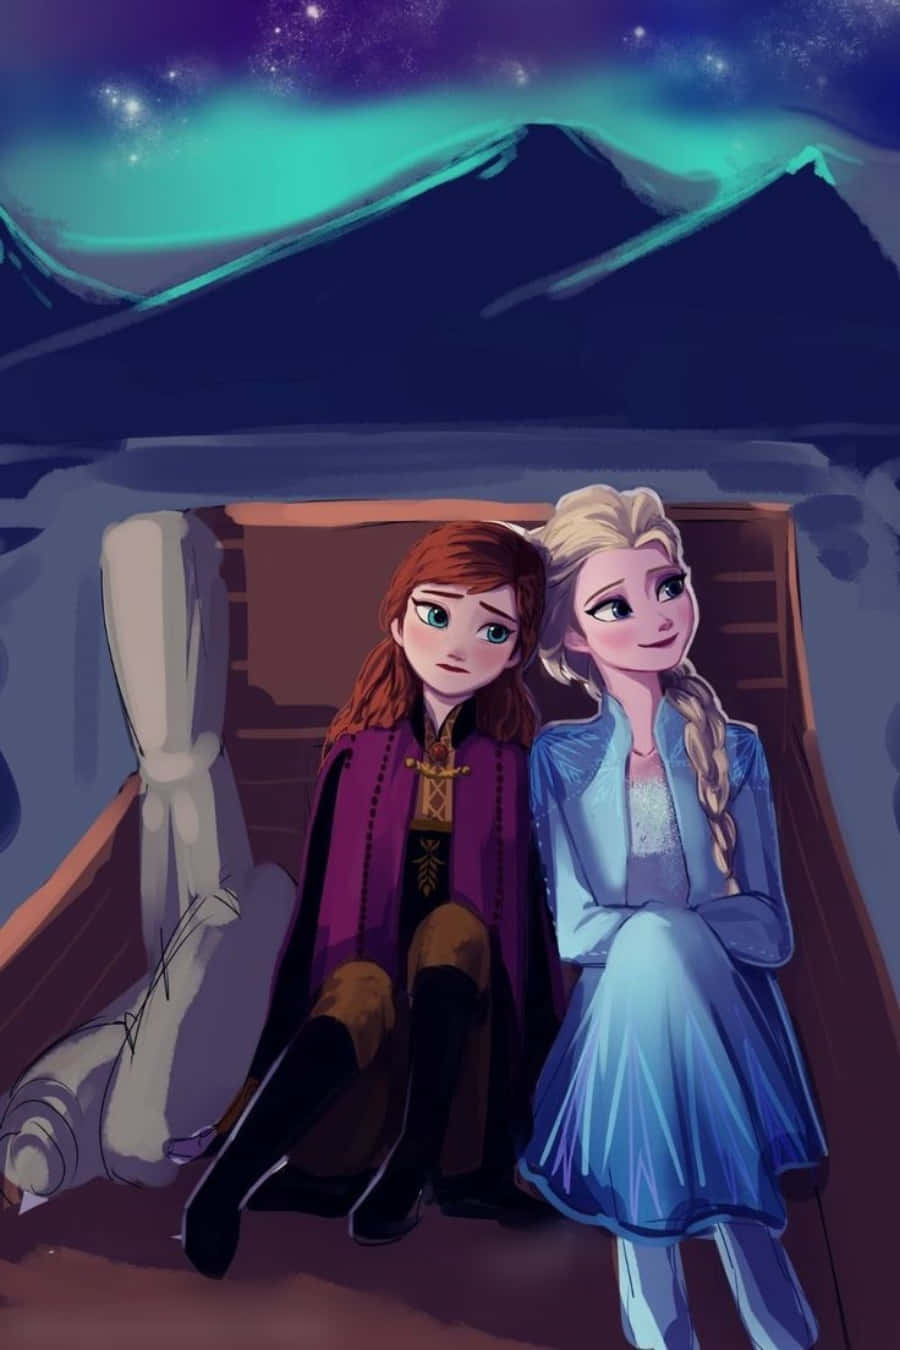 "Sisters Forever - Elsa and Anna Candid Portrait"